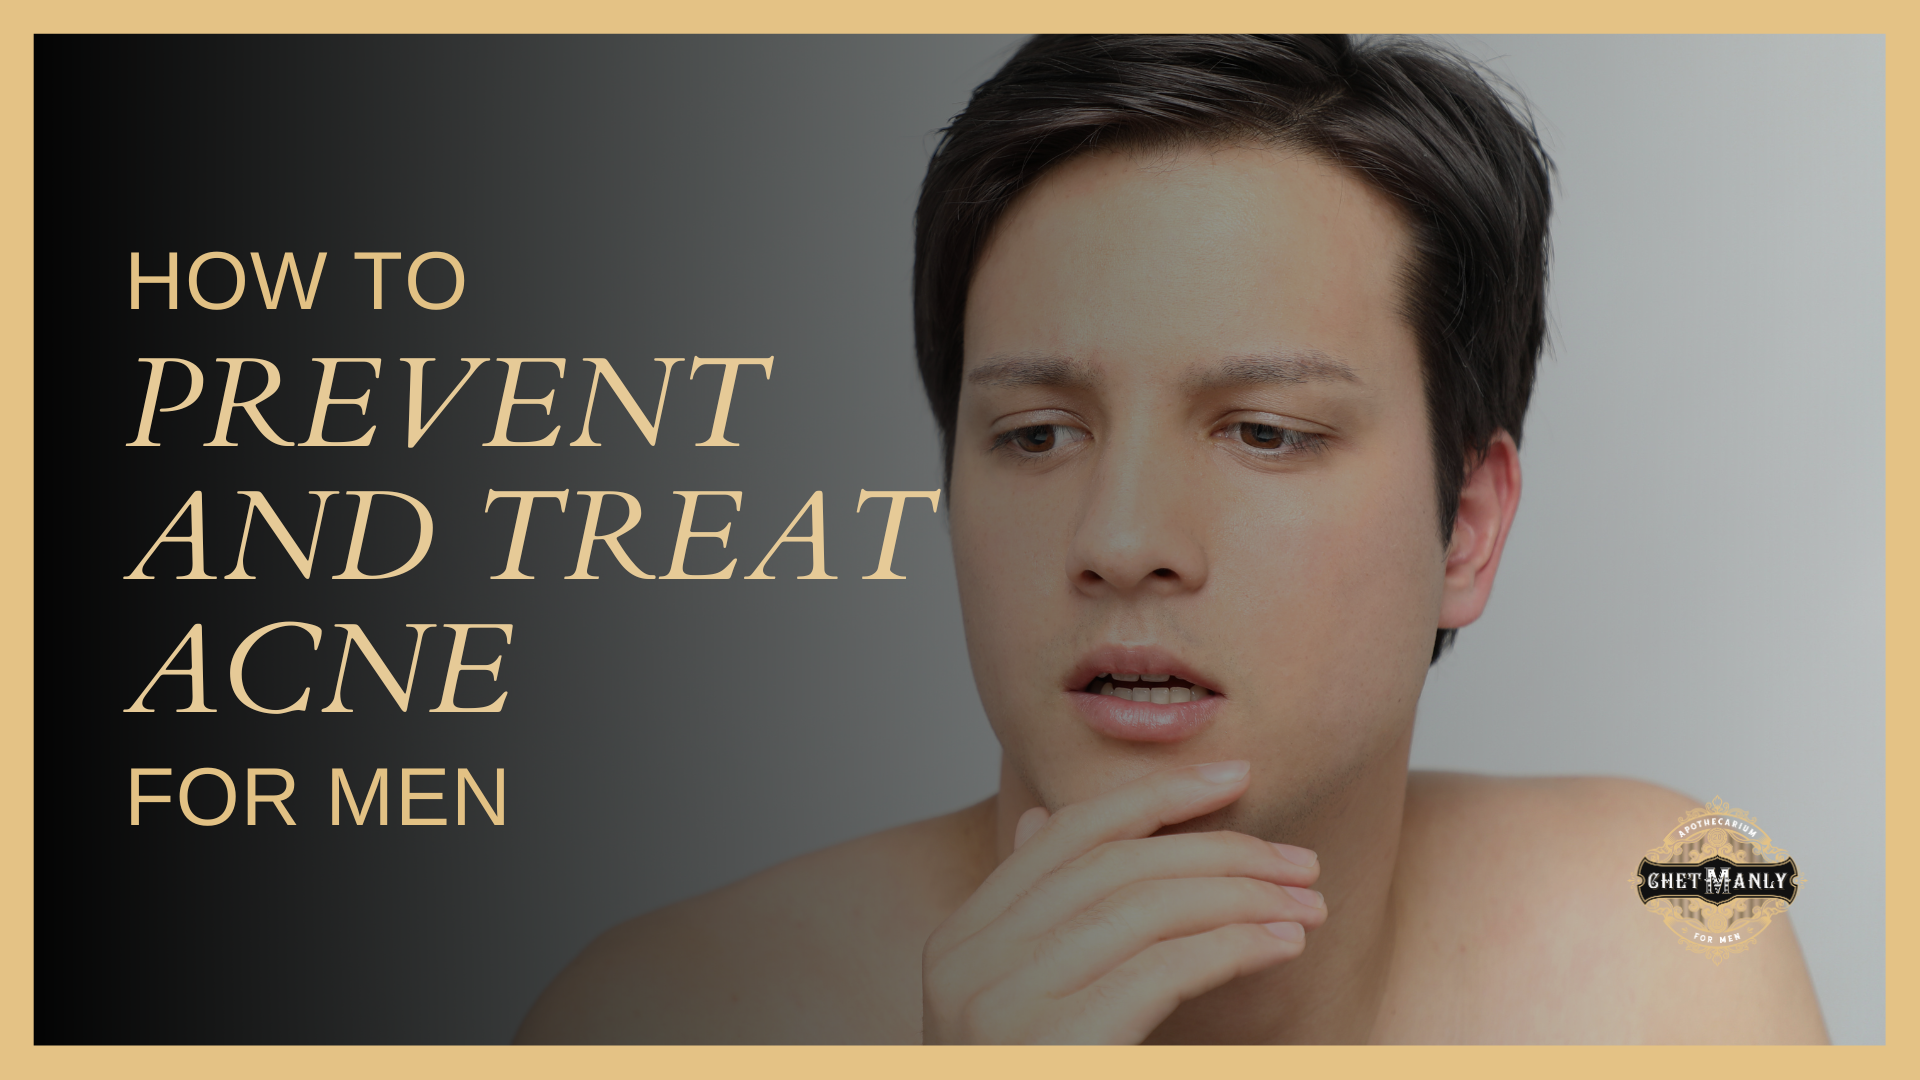 How to Prevent and Treat Acne for Men